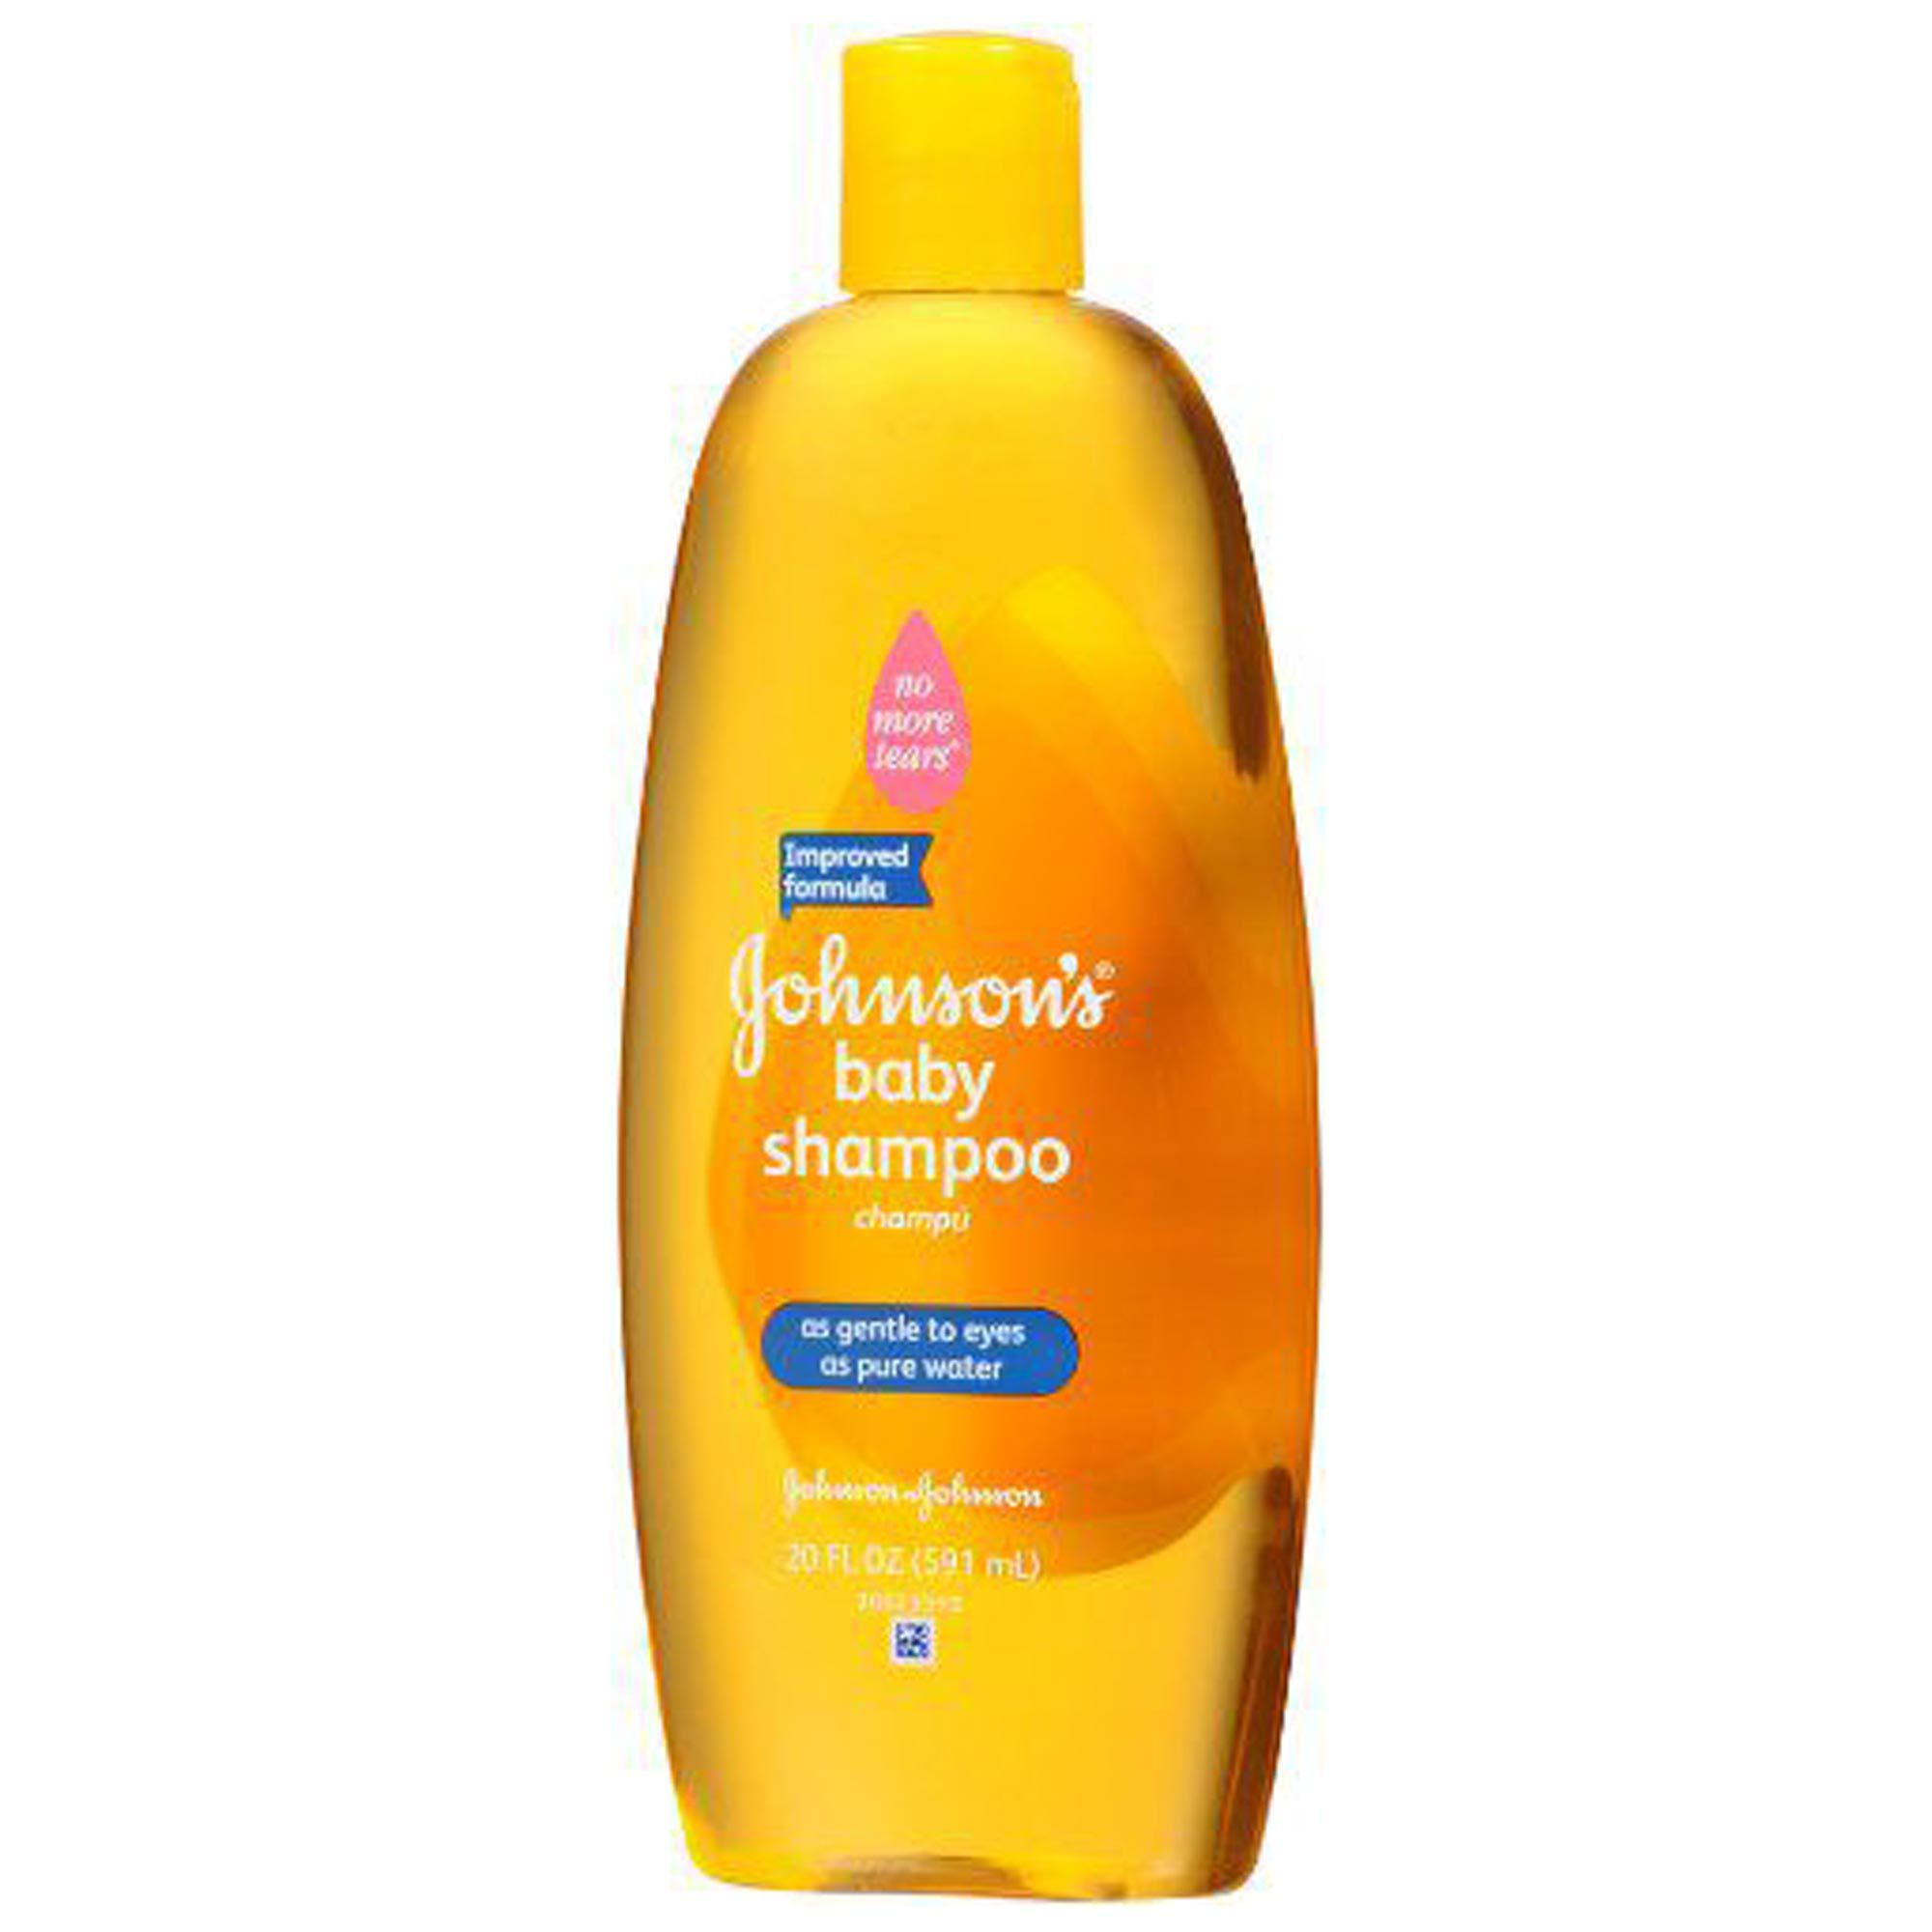 baby shampoo to clean brushes